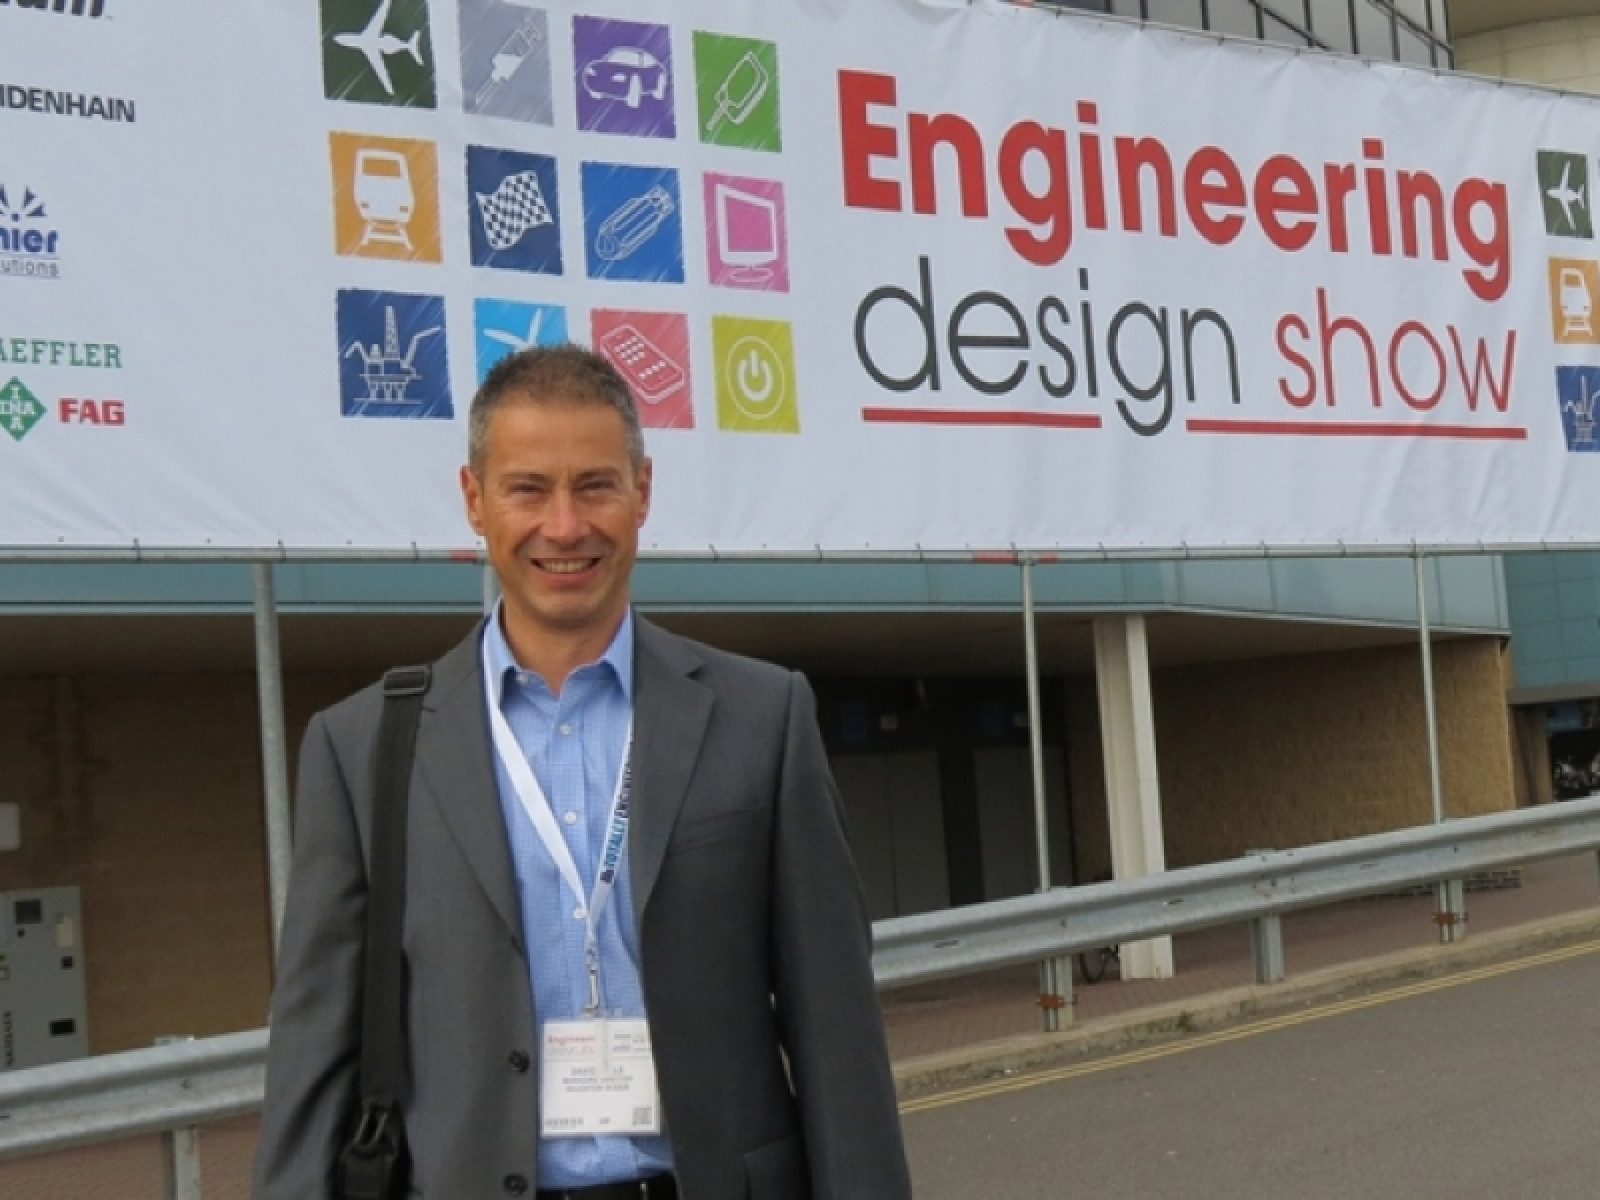 Hit at Engineering Design Show Conference